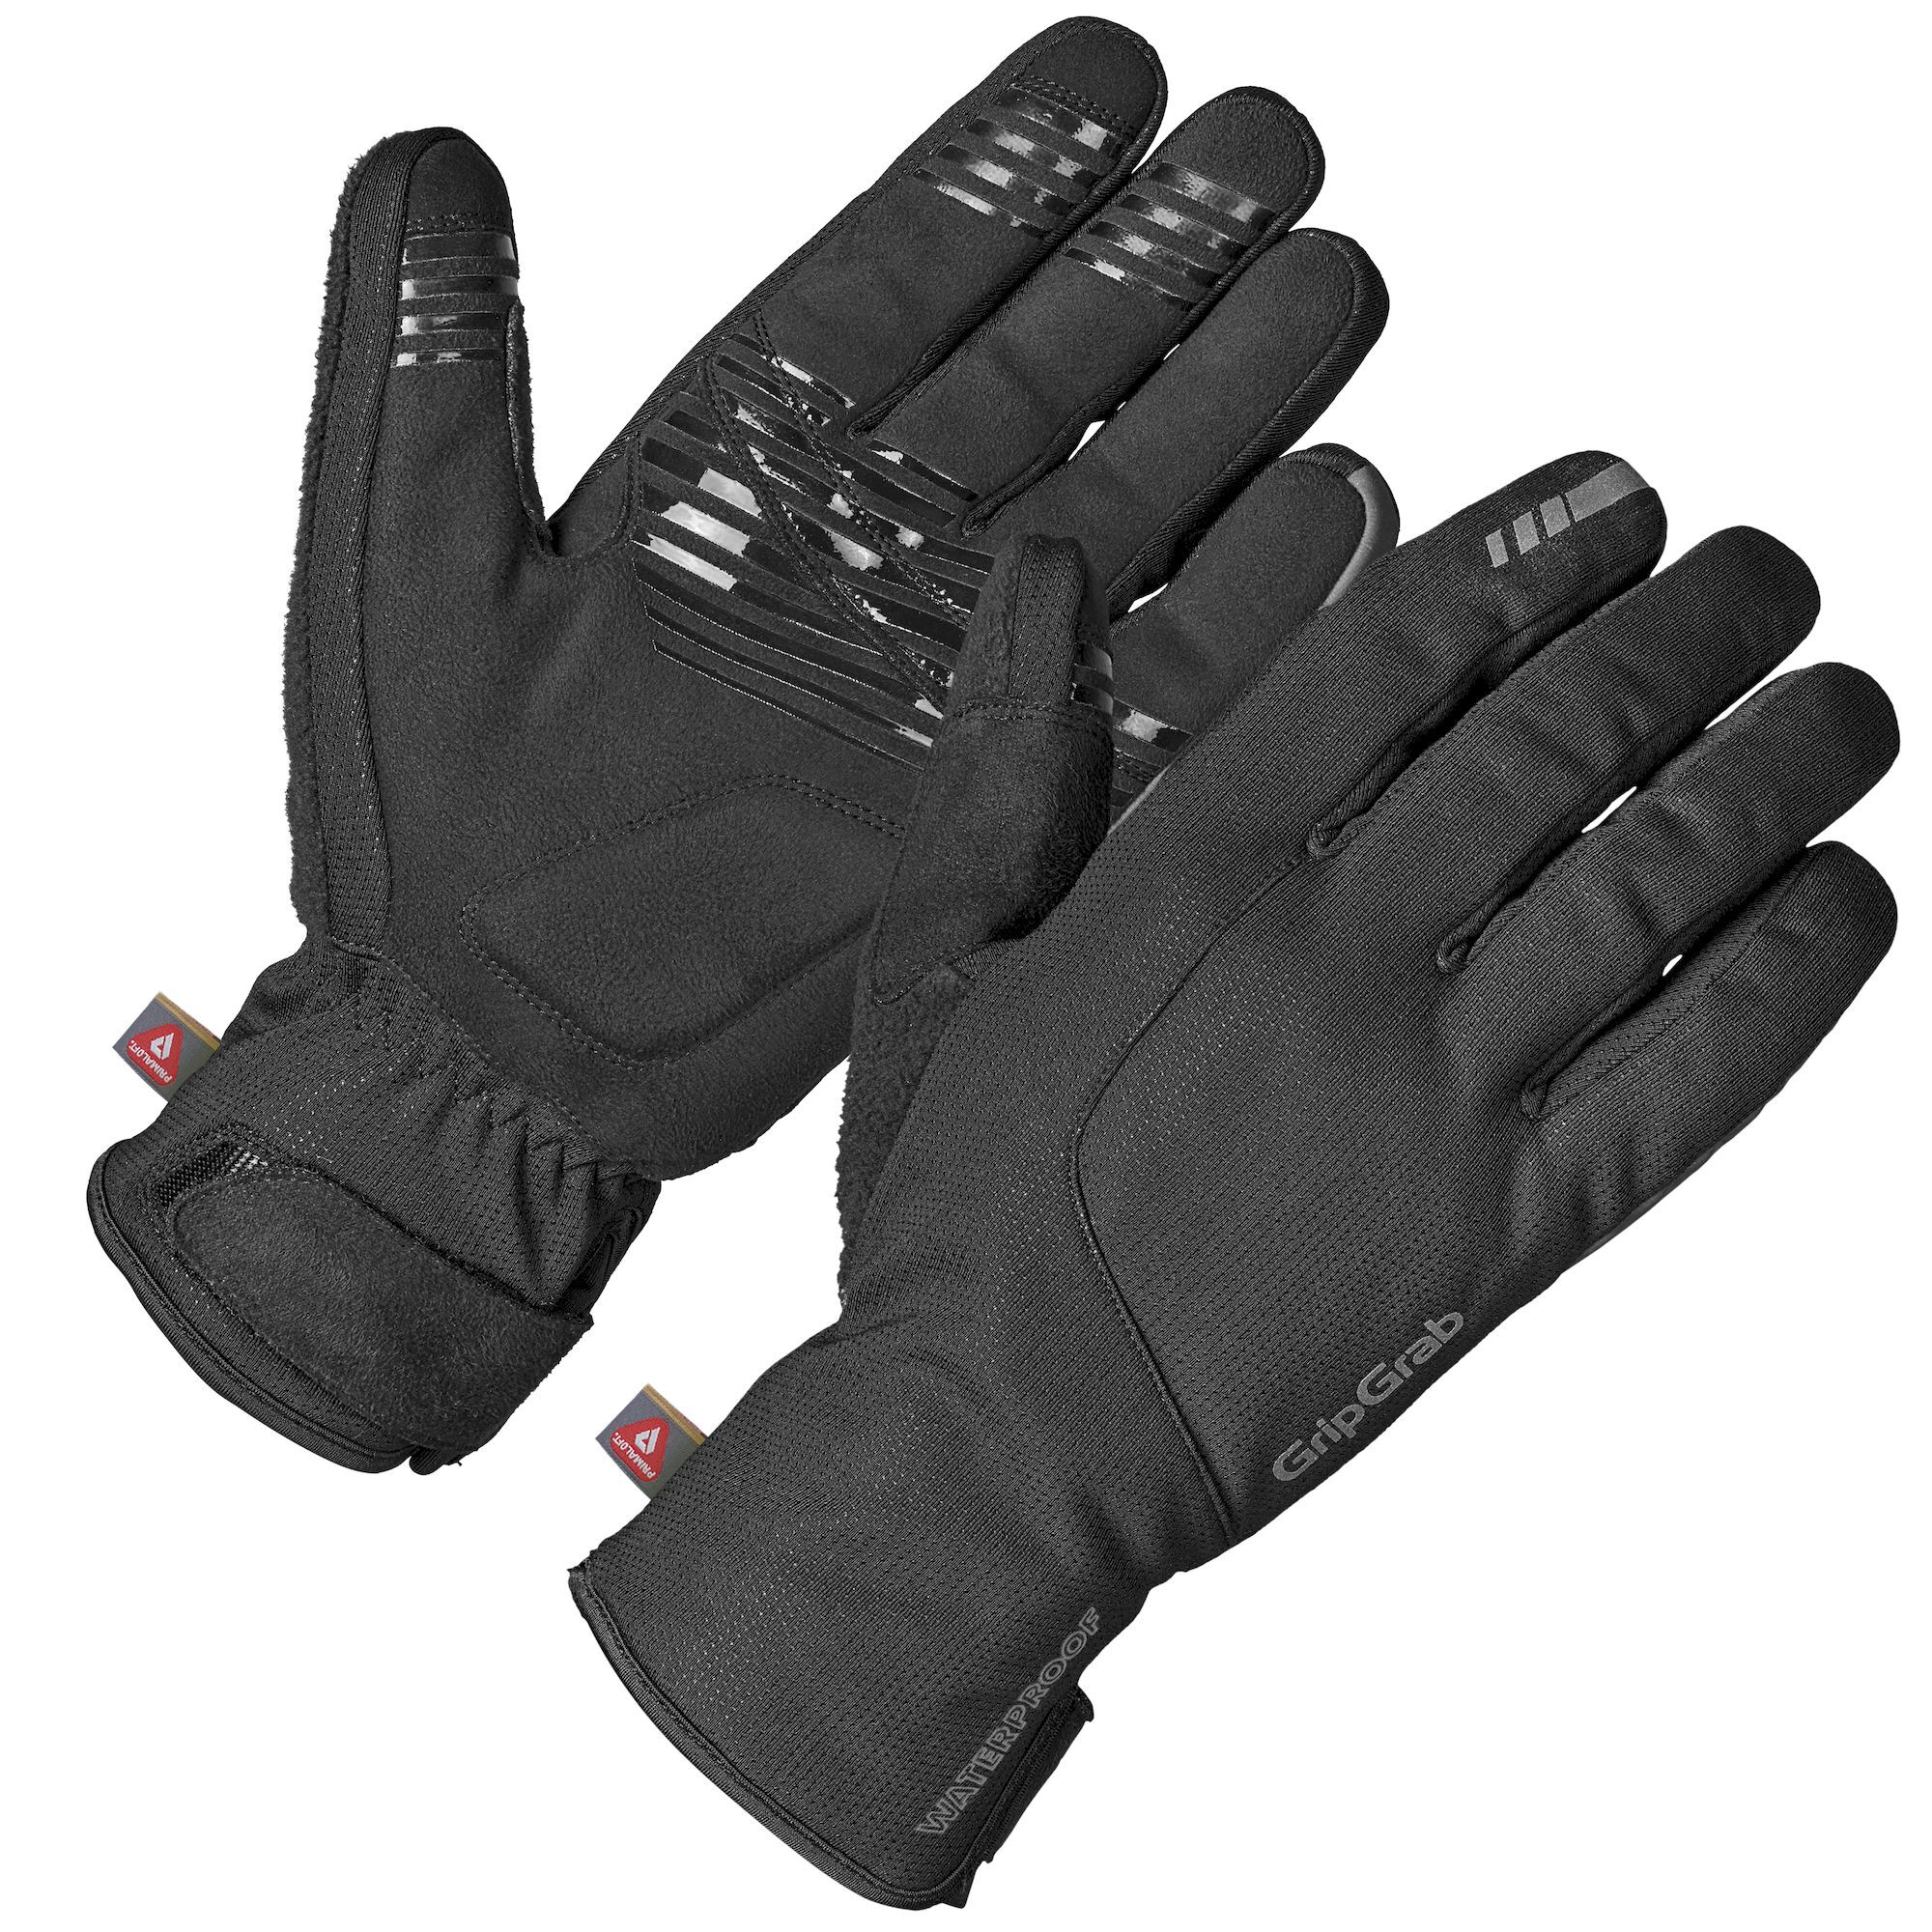 GripGrab Polaris 2 Waterproof Winter Gloves - Guantes ciclismo